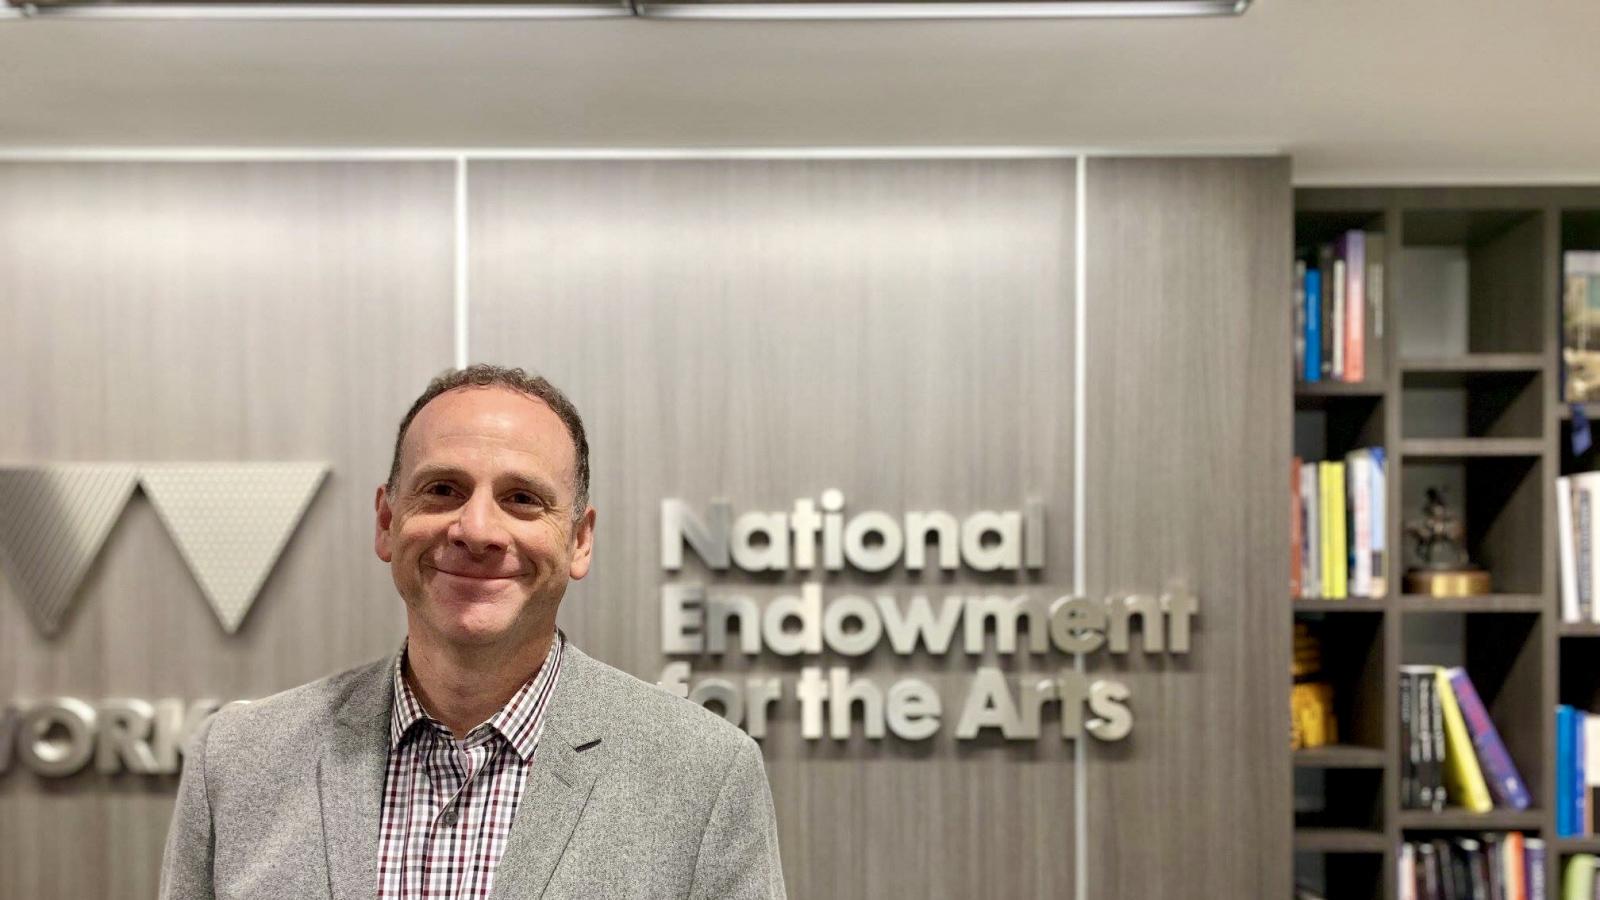 man smiling in front of National Endowment for the Arts sign